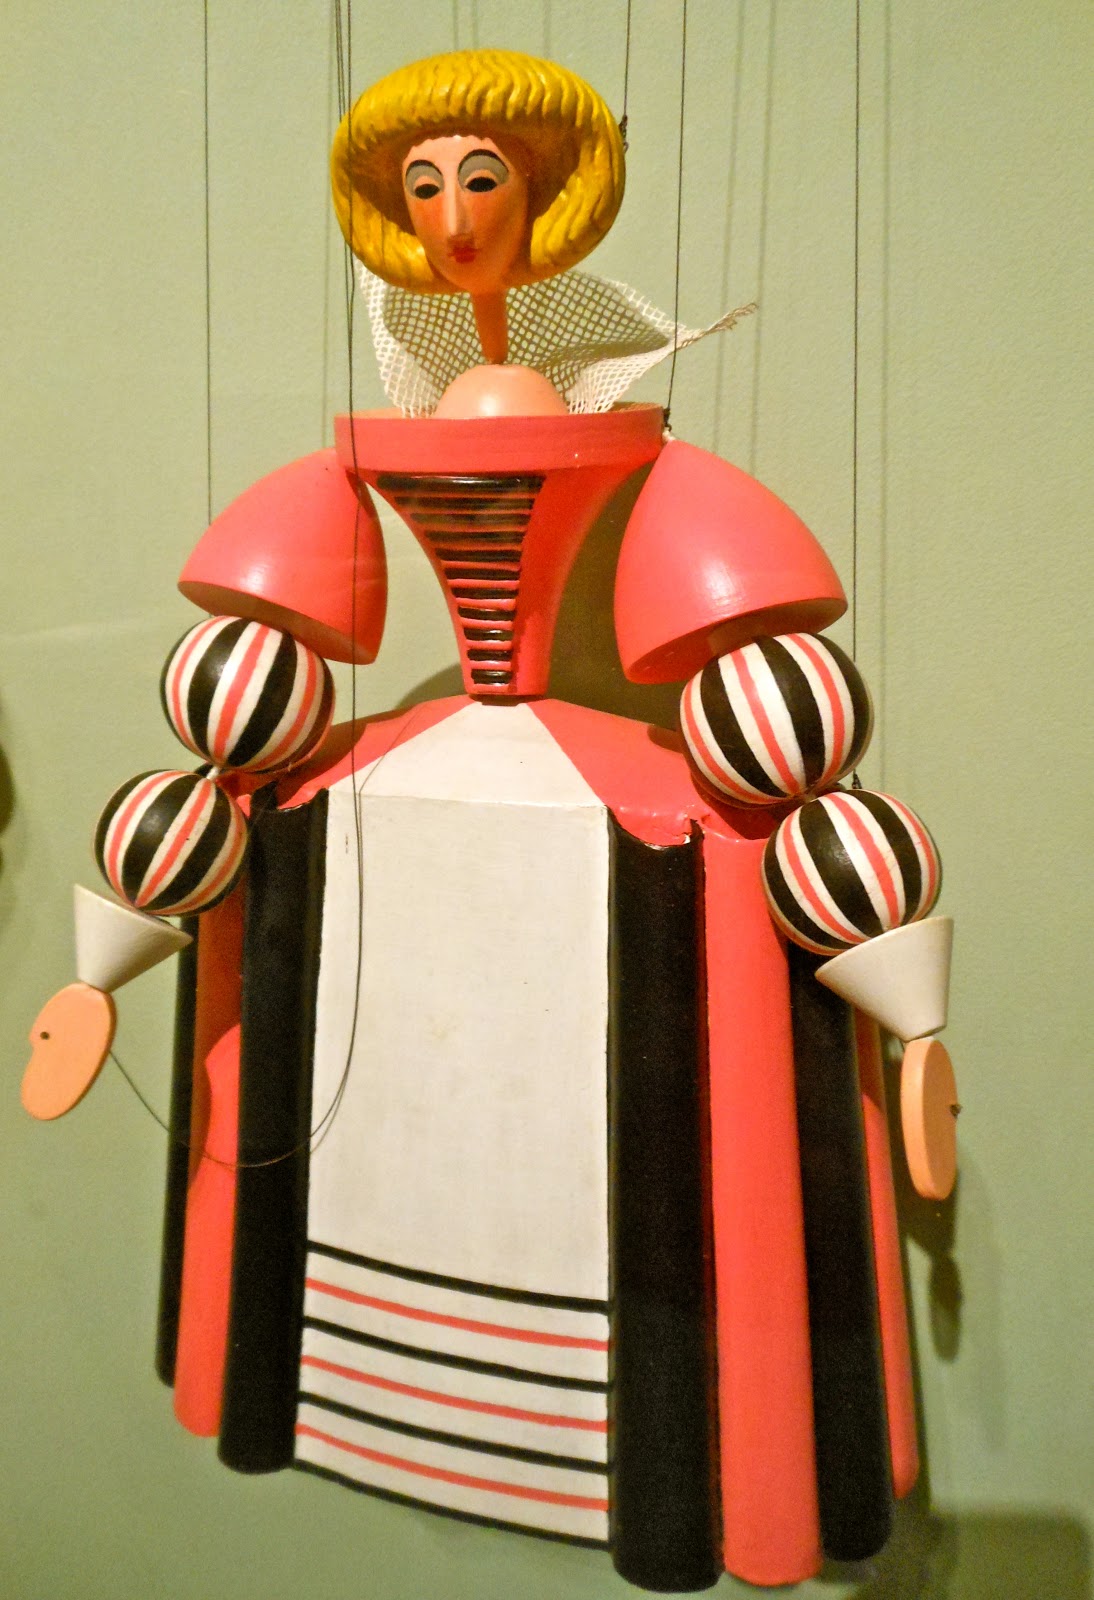 Starr Review Czech Puppets and Their Tradition, at the Columbus Museum of picture pic